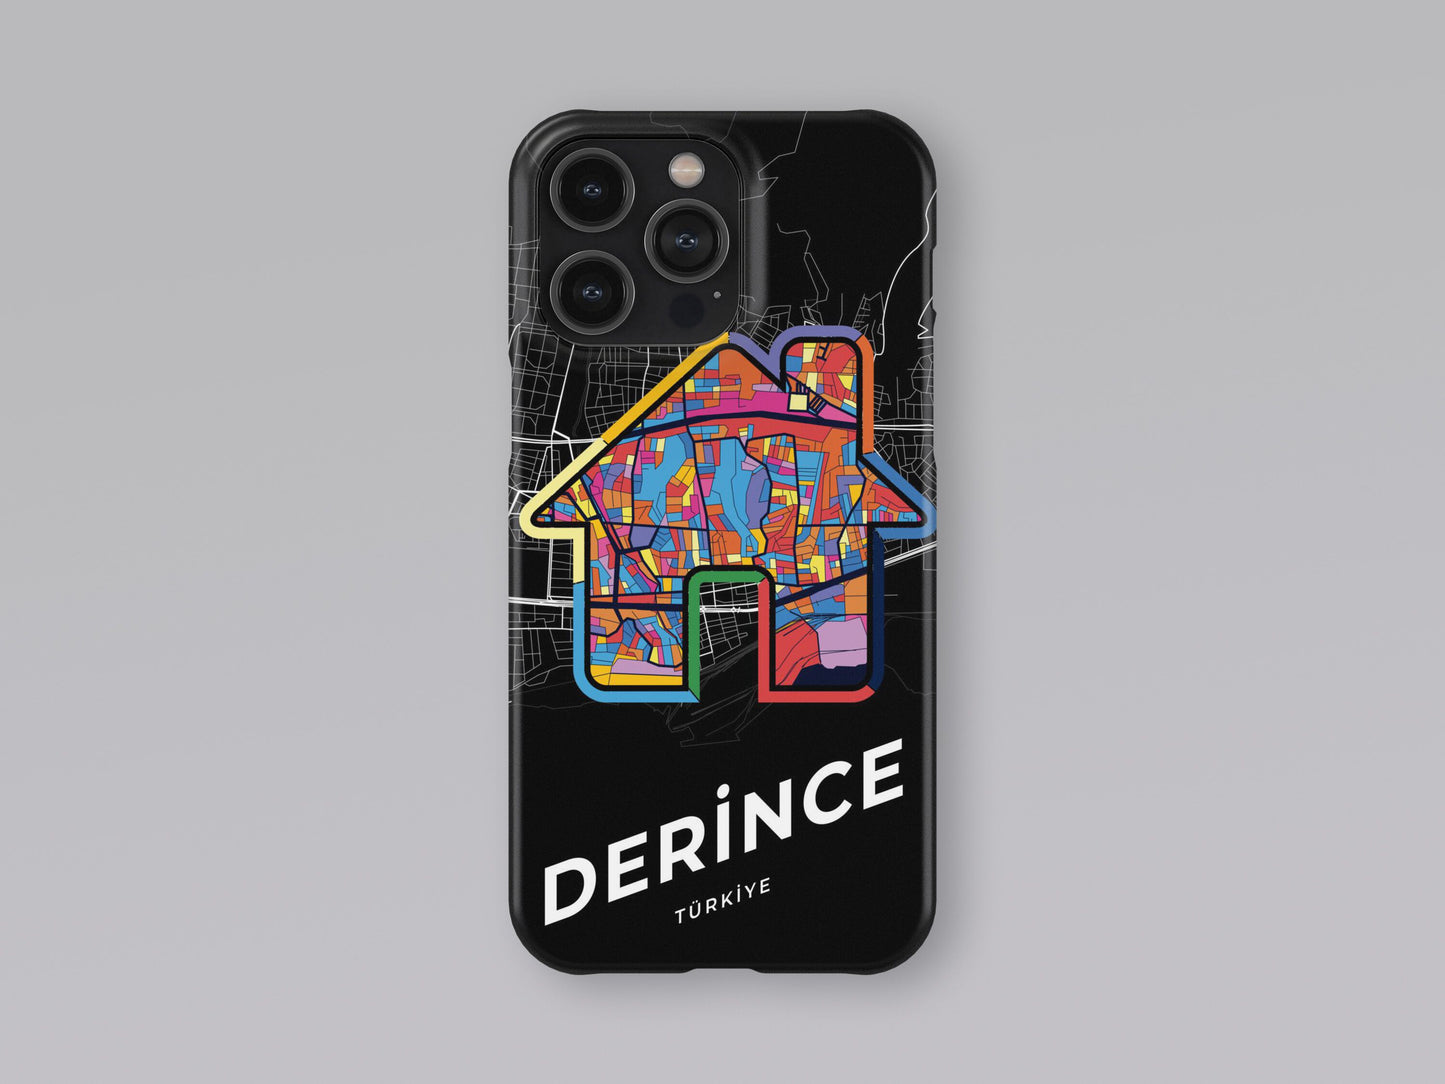 Derince Turkey slim phone case with colorful icon. Birthday, wedding or housewarming gift. Couple match cases. 3